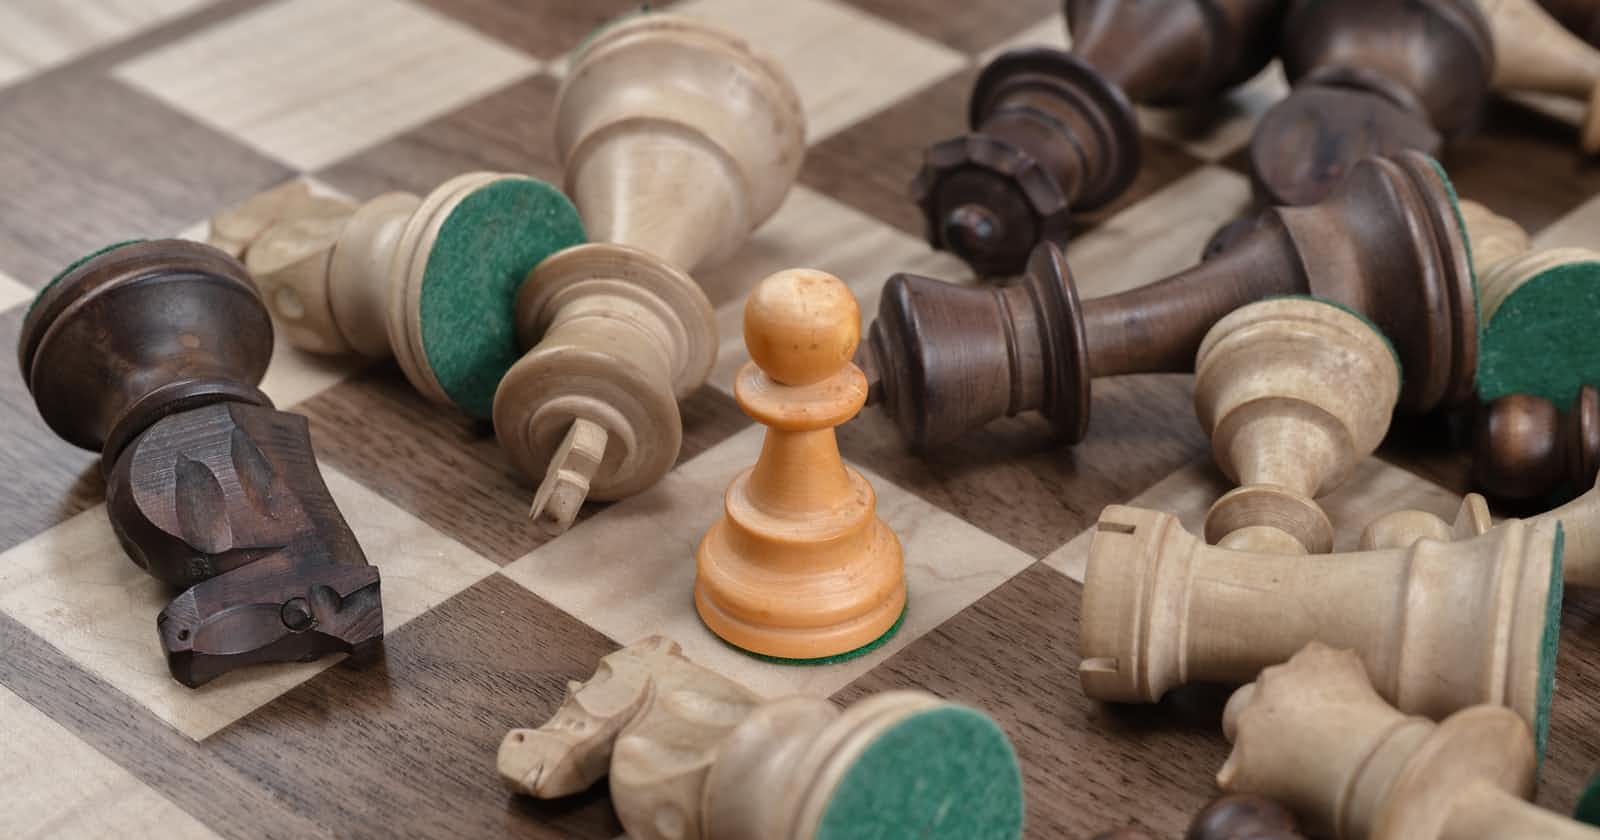 Are you a chess player or checkers?